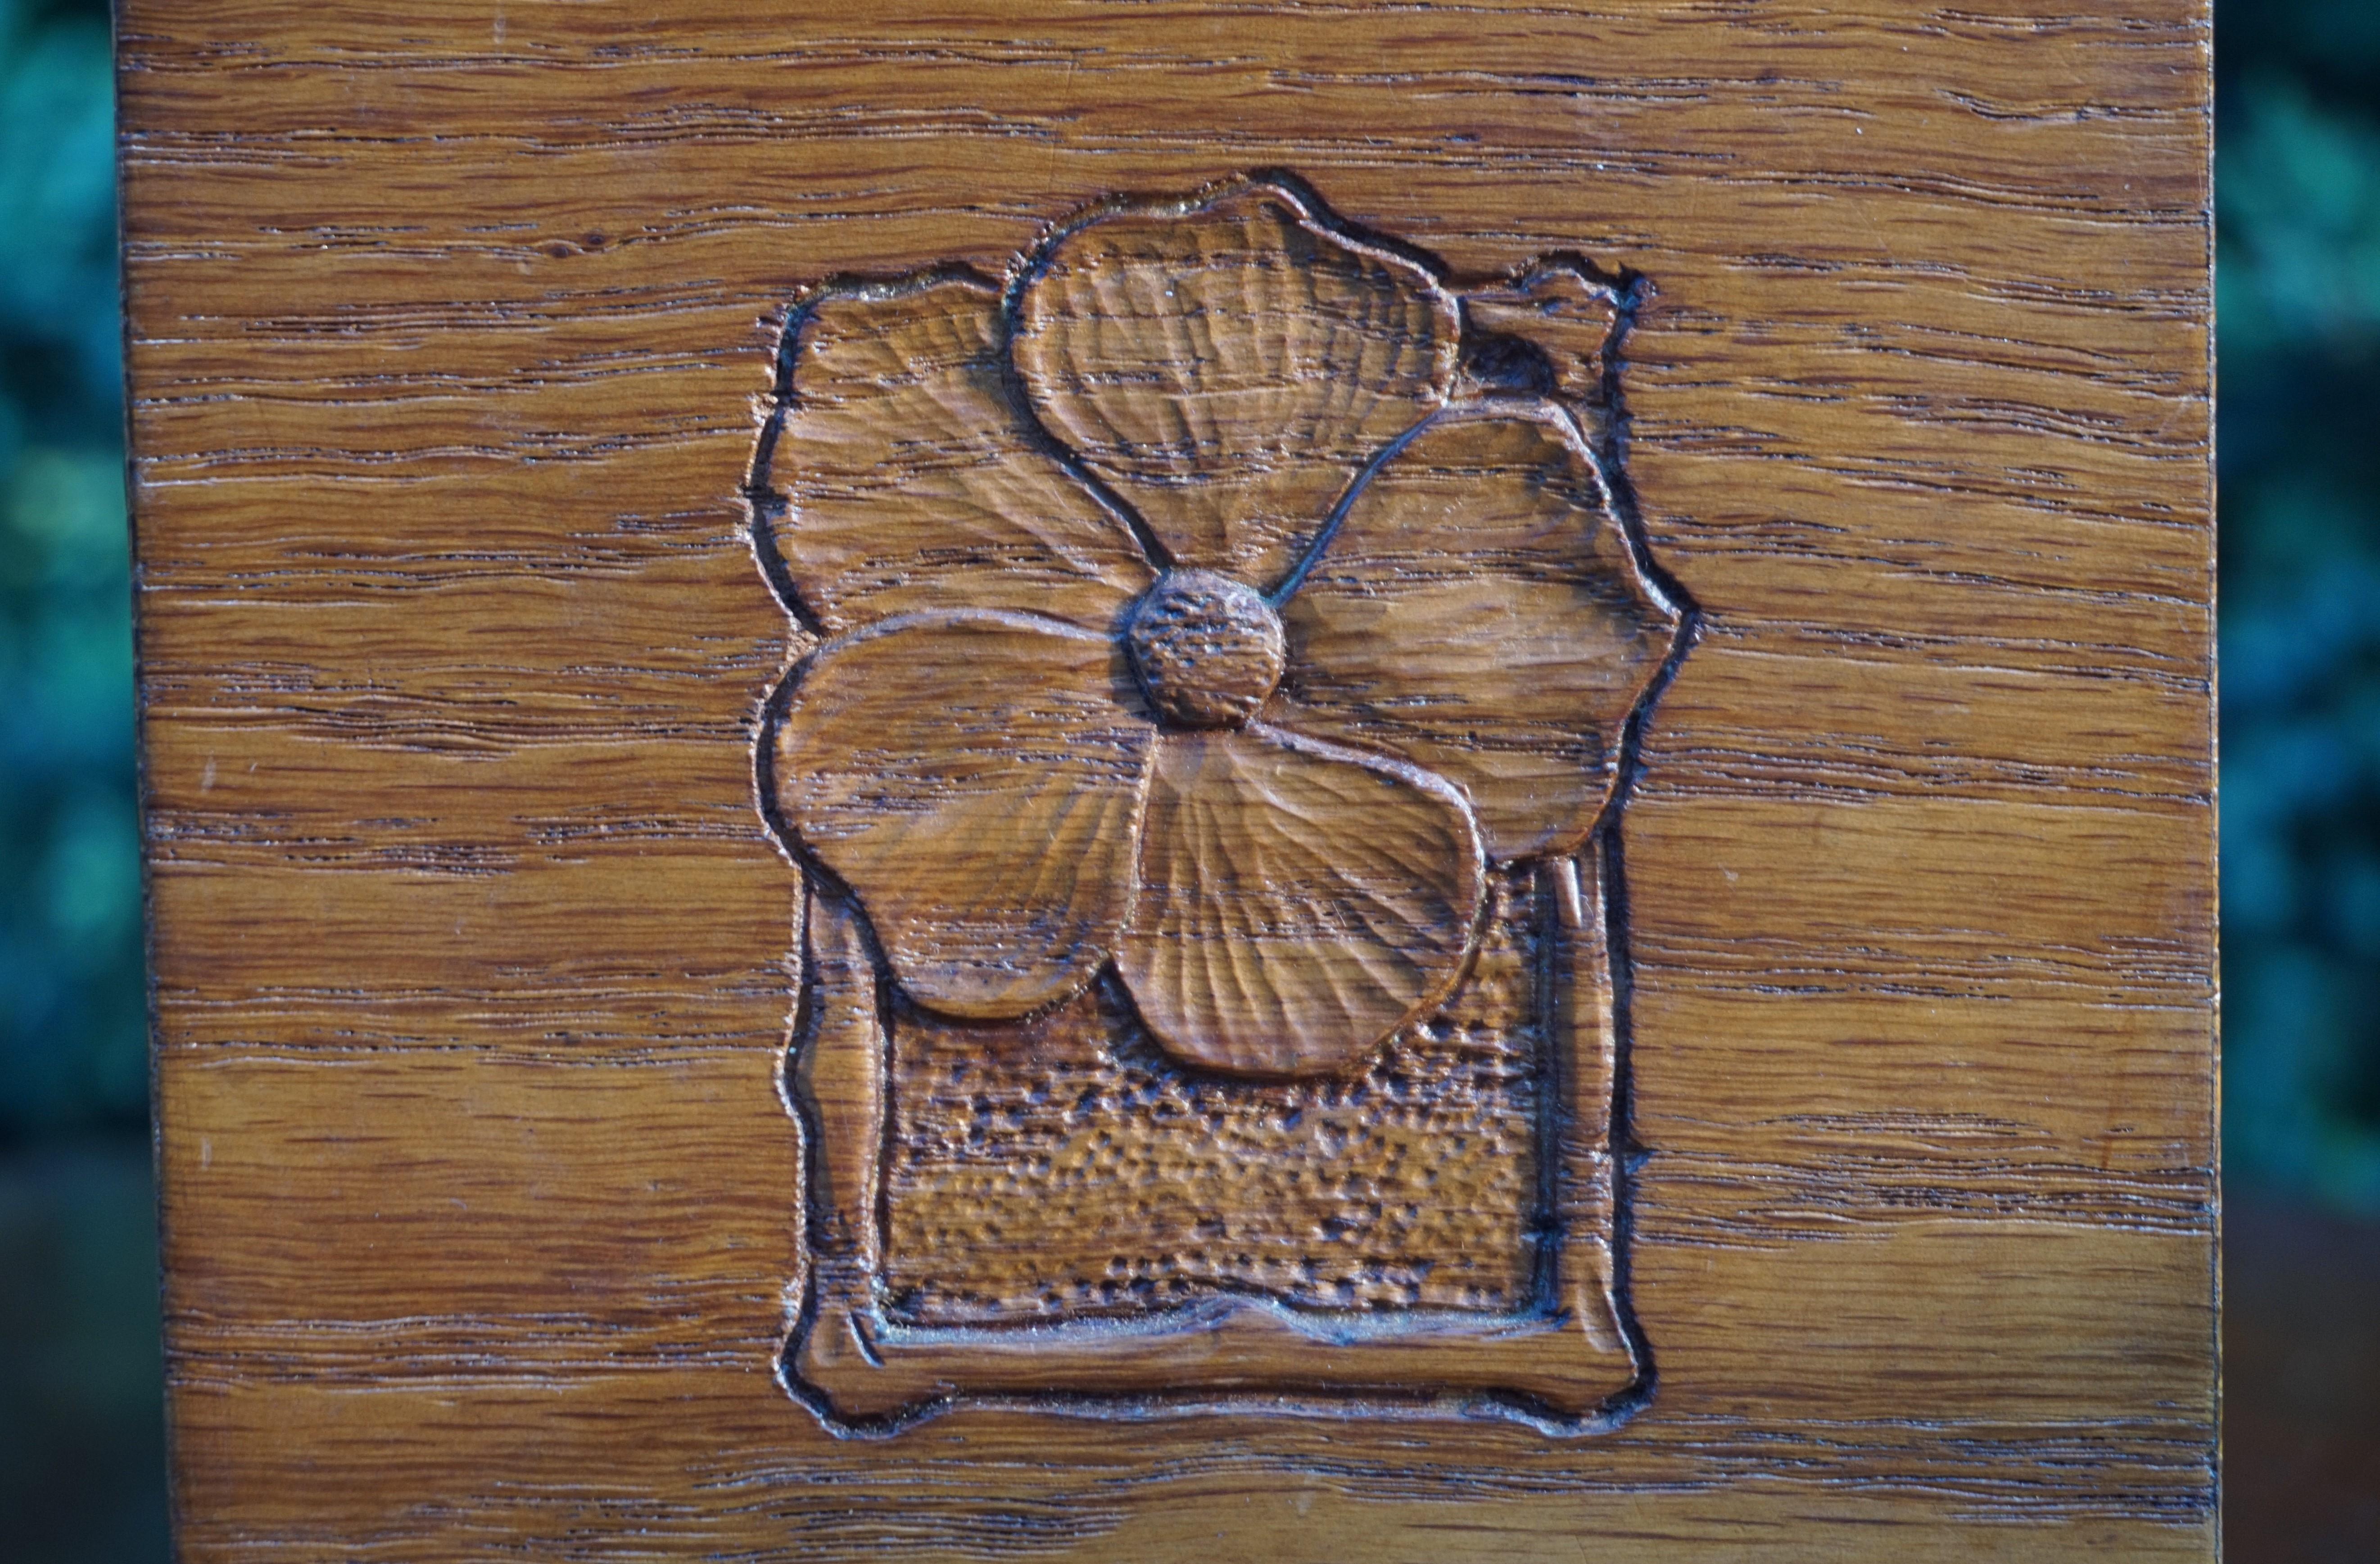 Antique and Unique Arts & Crafts Oak Jewelry Box with Hand Carved Flower Decor For Sale 4